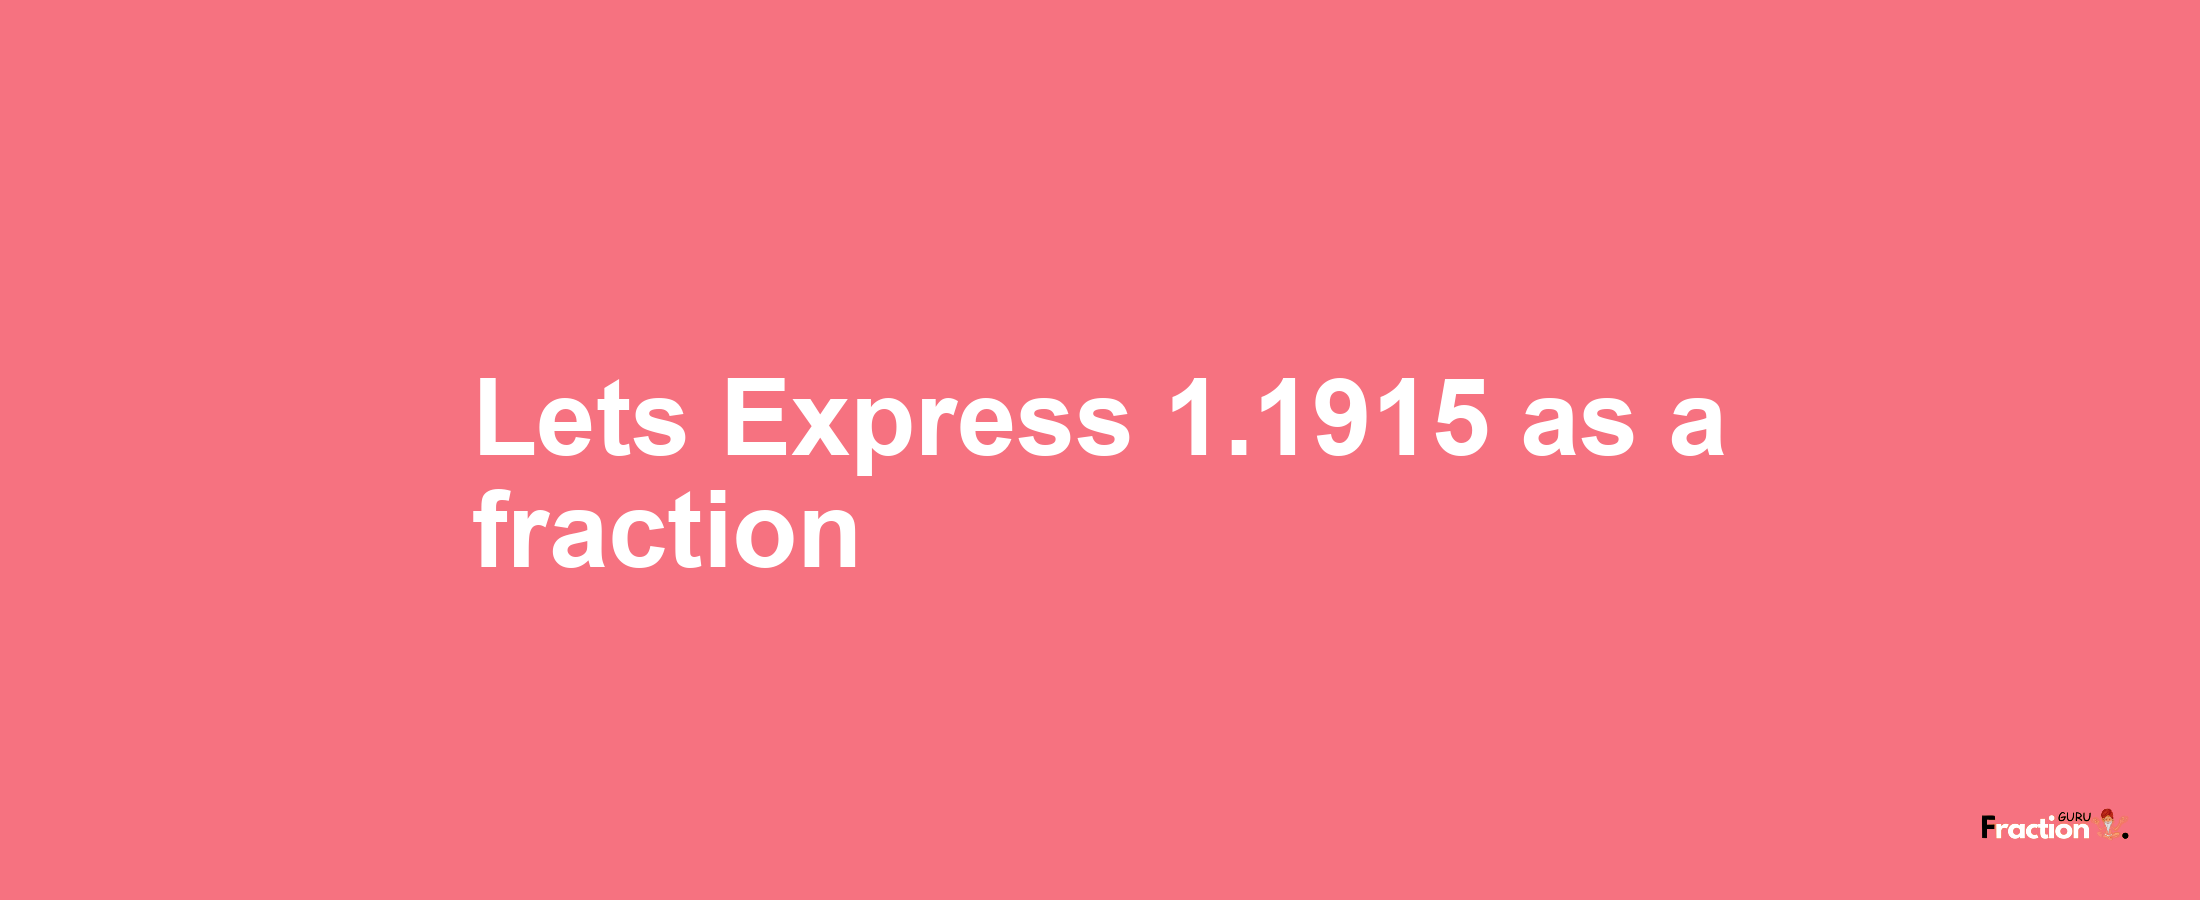 Lets Express 1.1915 as afraction